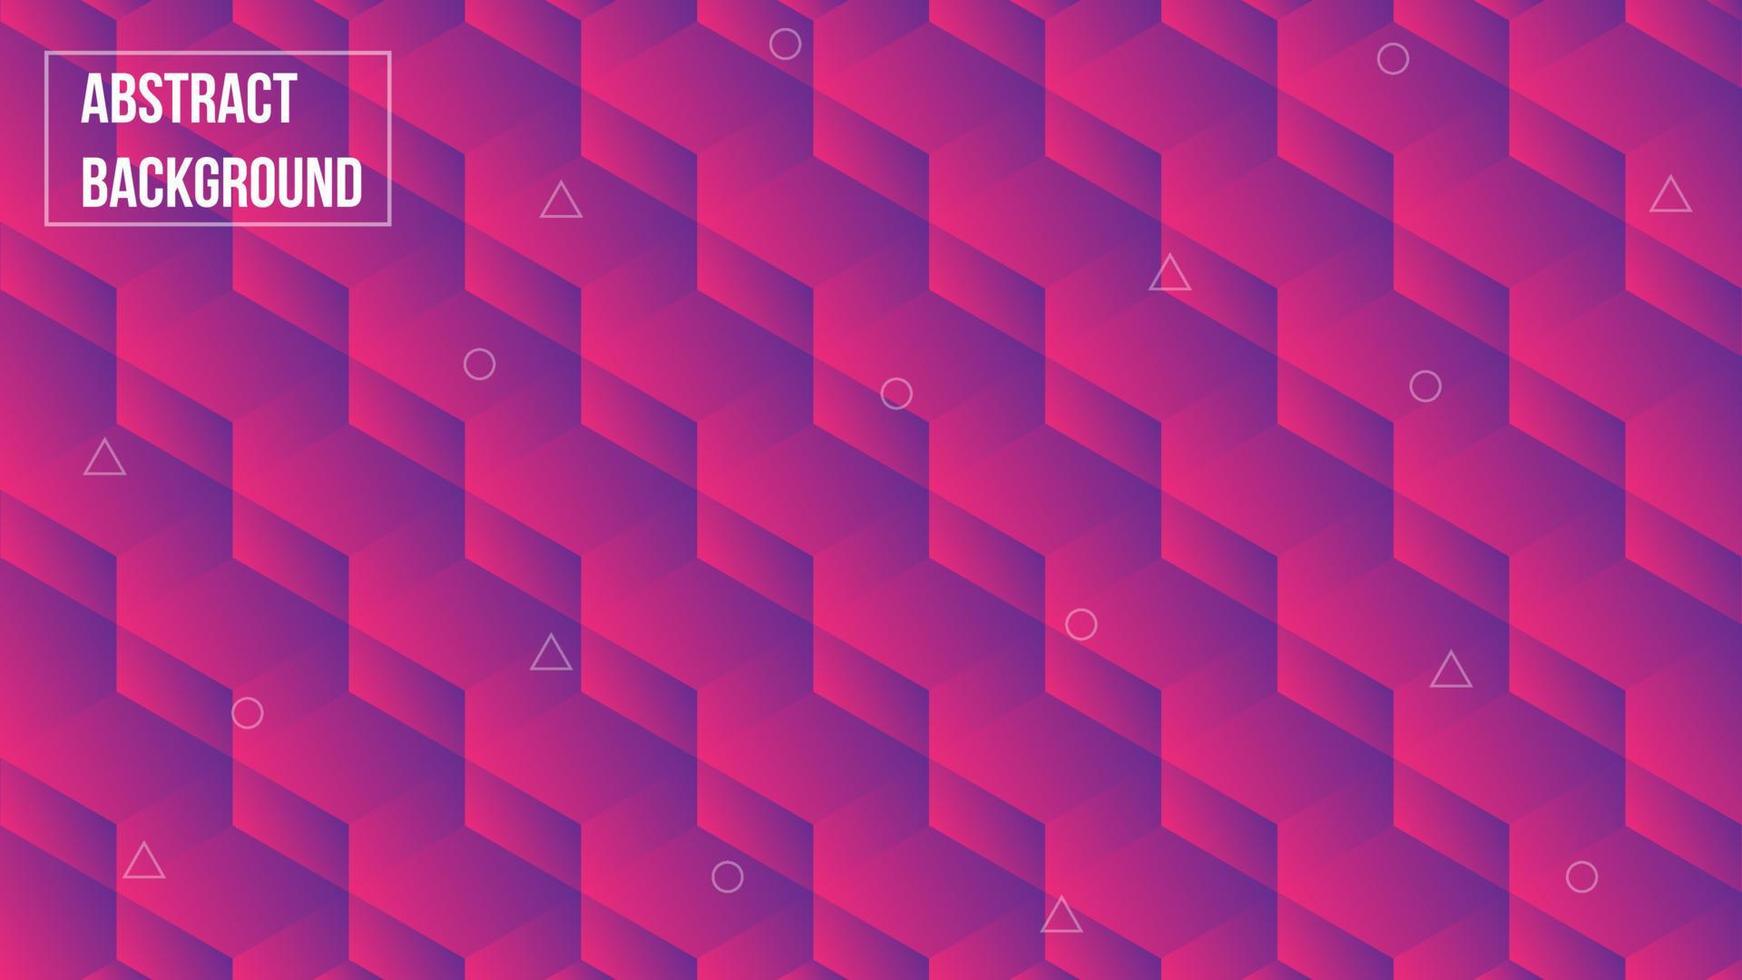 Colorful Hexagon Pattern Abstract Background, Wallpaper or Landing Page. EPS 10 Editable Vector